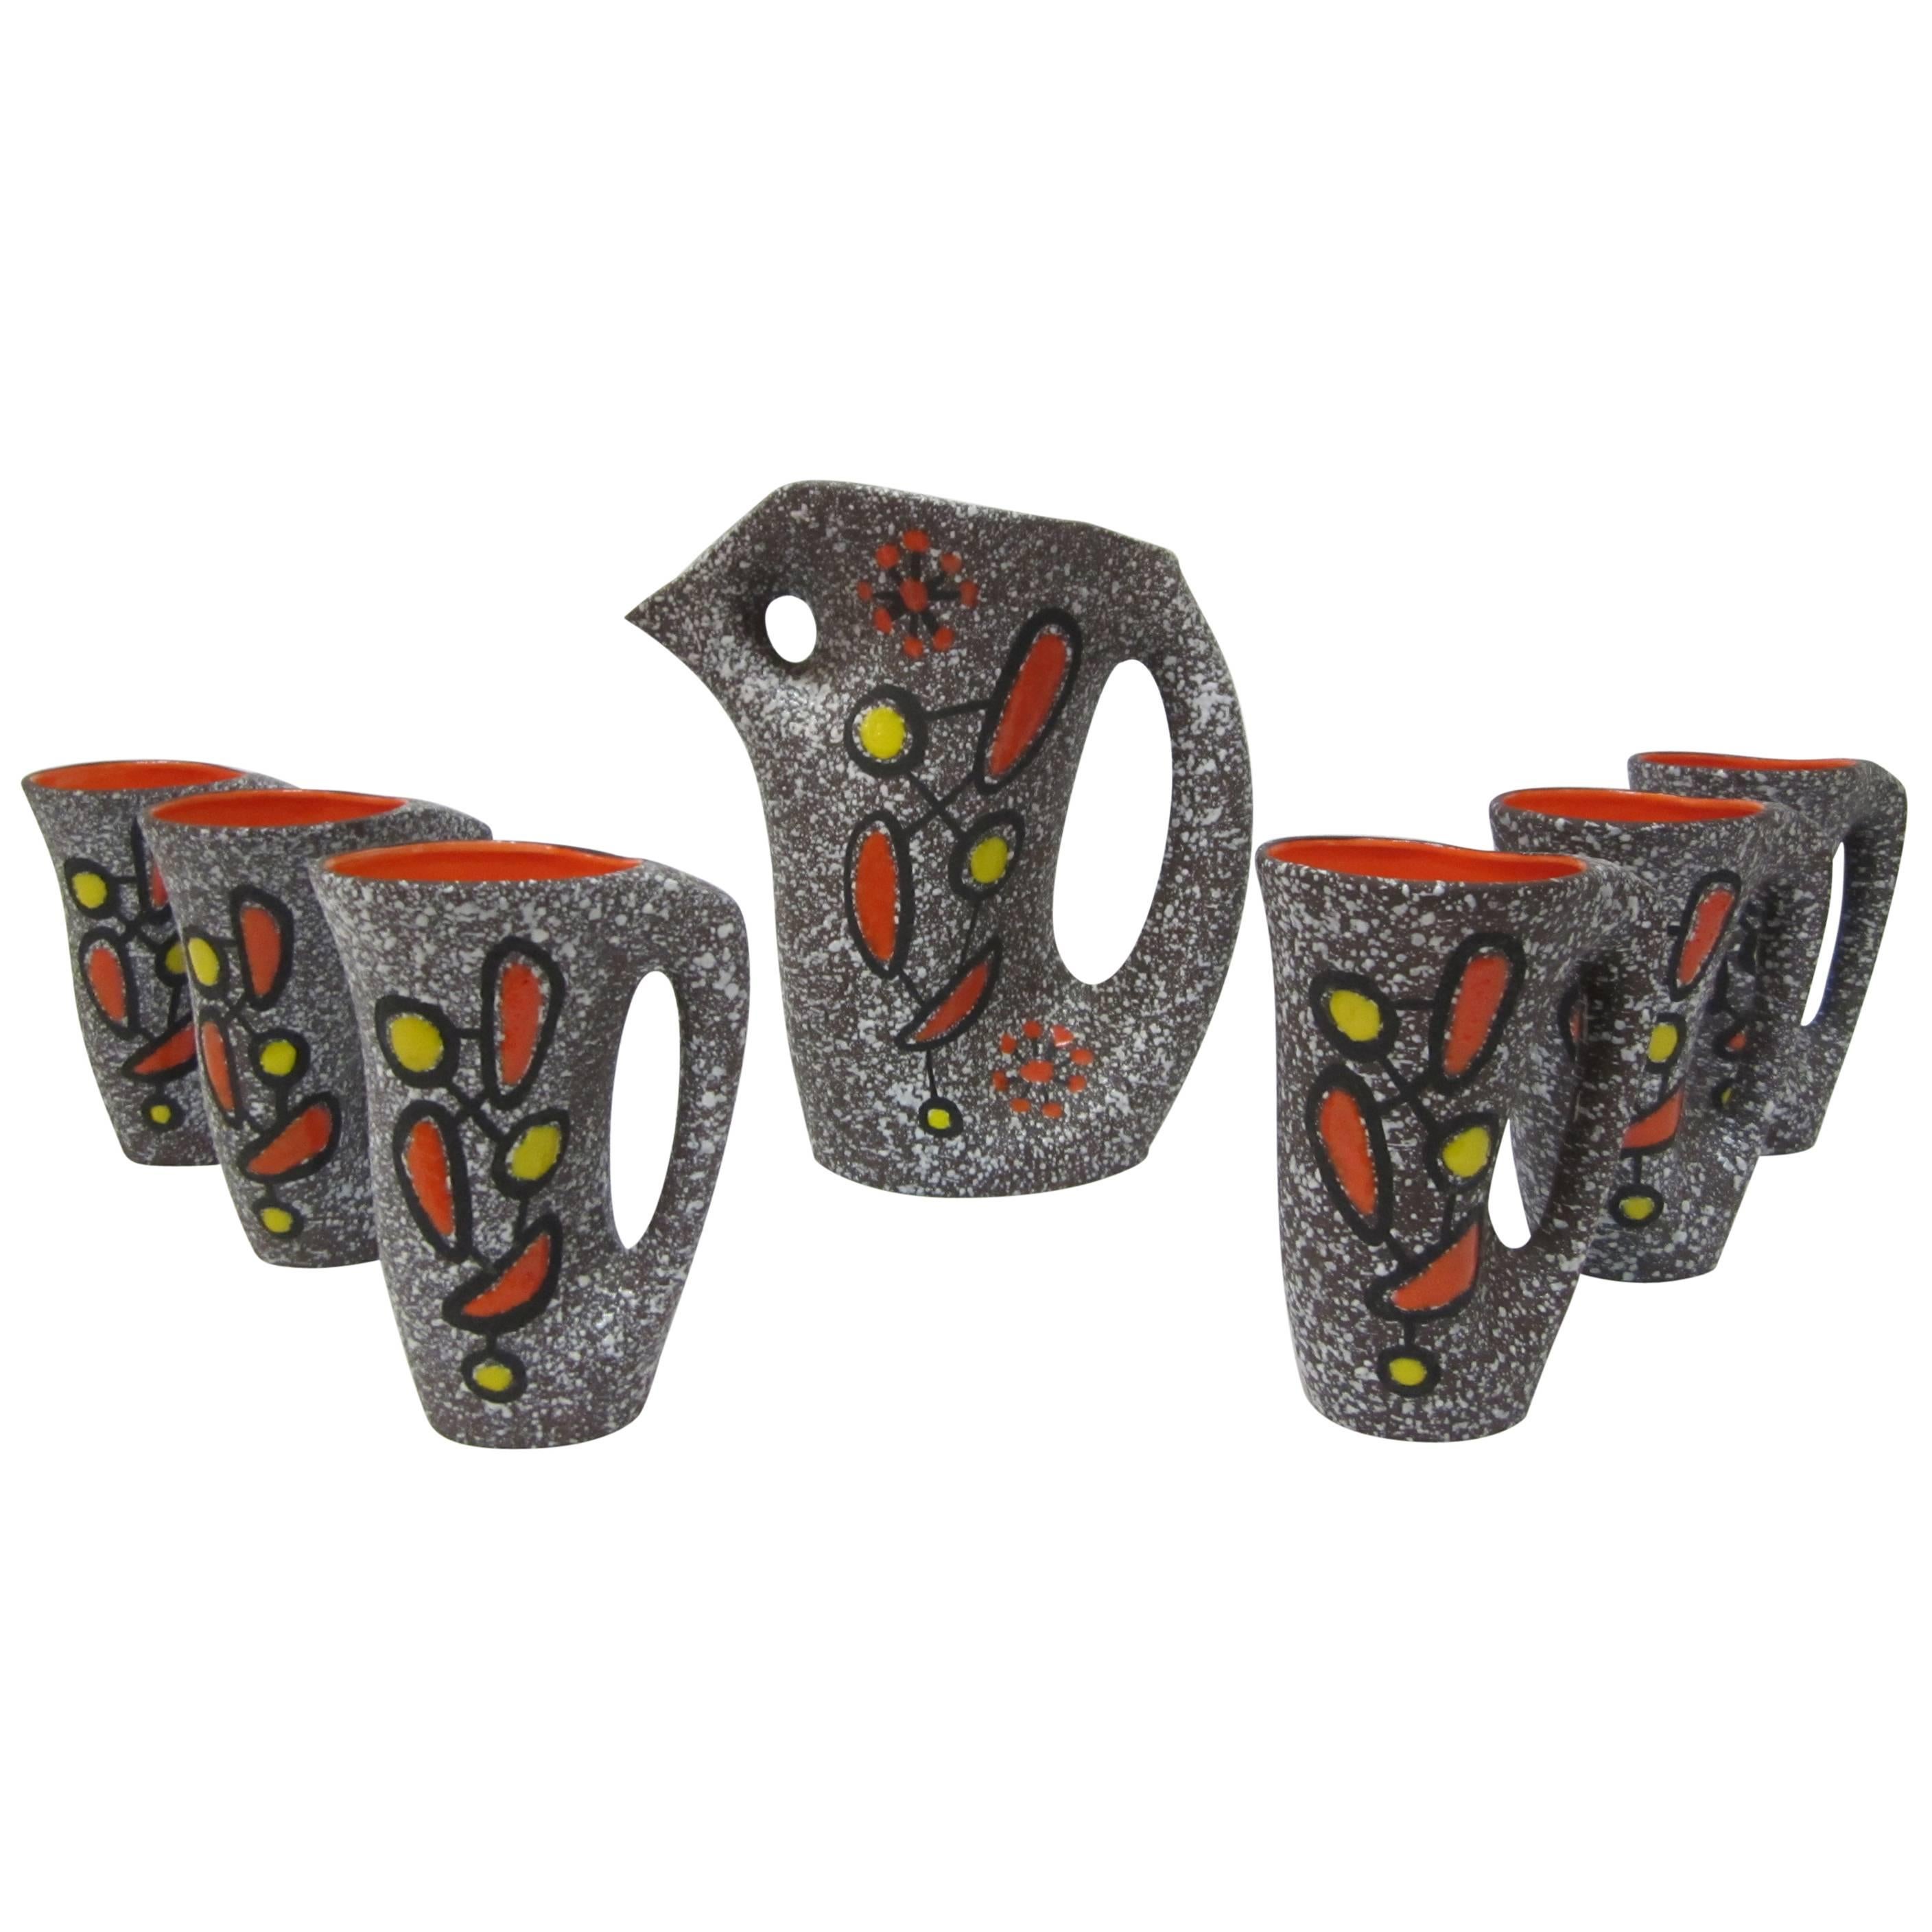 Vallauris Ceramic Pitcher with Six Cups Designed by Le Vaucour, France, 1950s For Sale